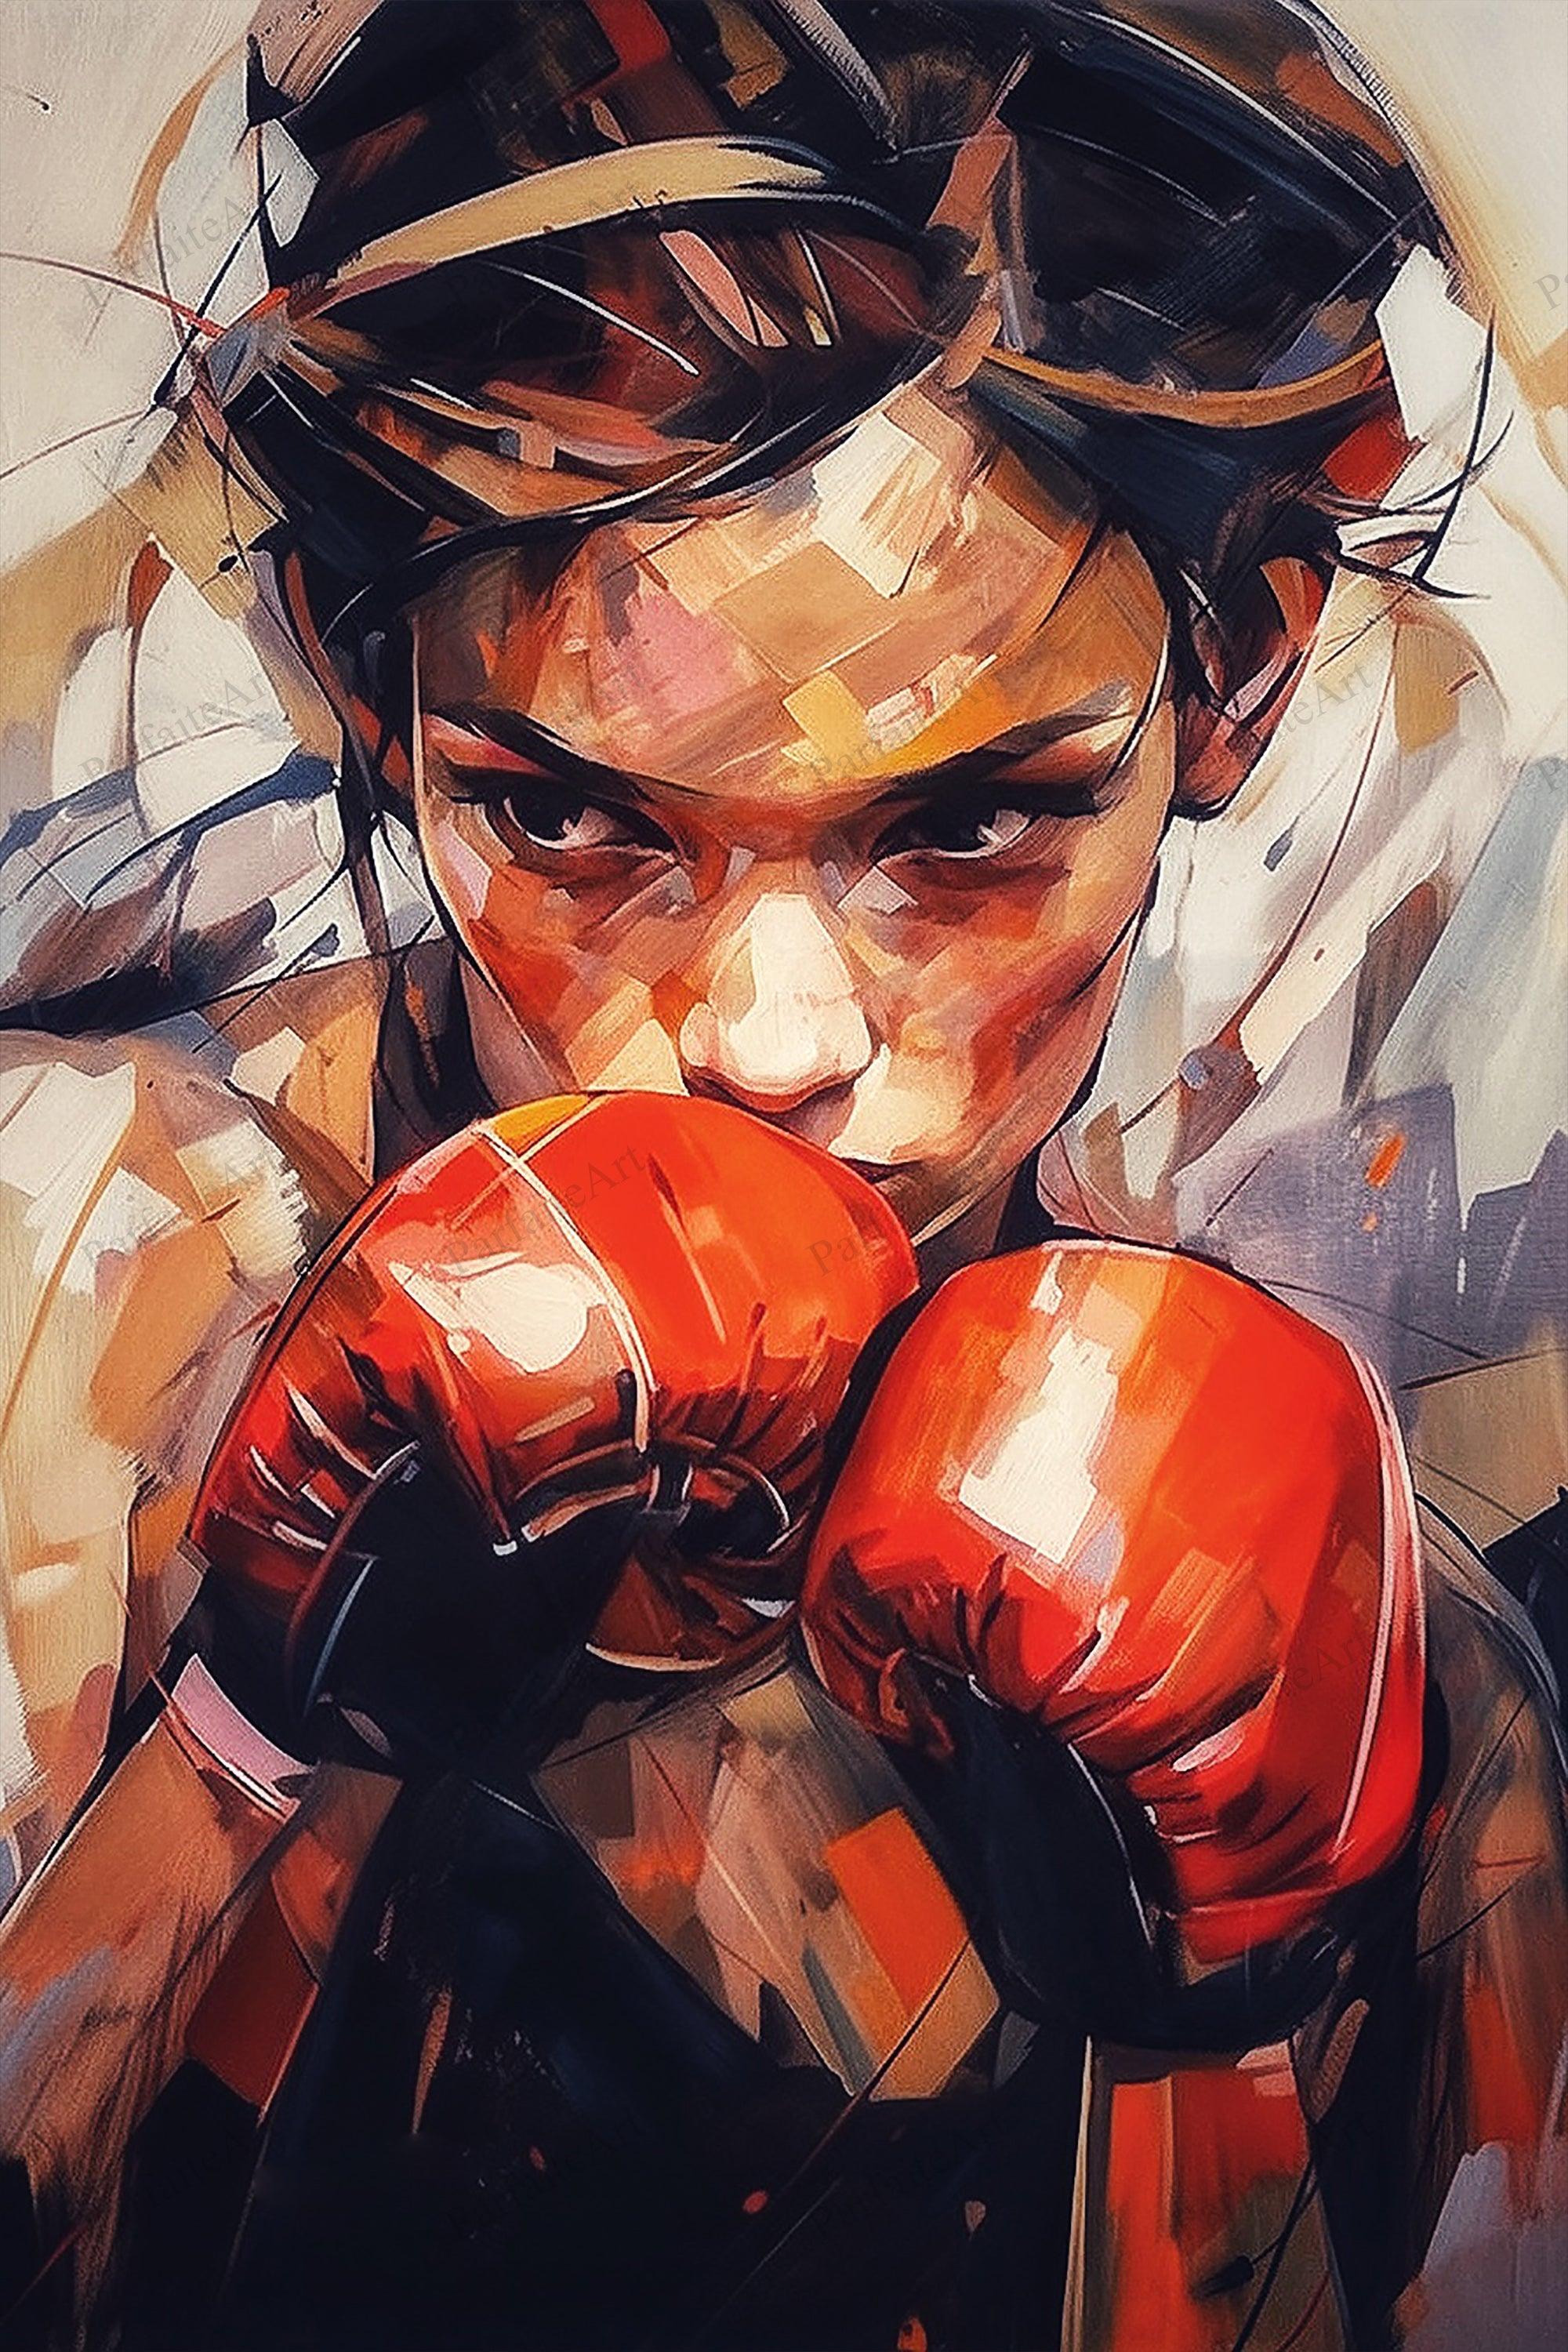 Female Boxers，Hand Painted Colorful Decorative Canvas Artwork，Moody Wall Decor，Cotton Gloss Canvas Living Room Decor，High-Quality Waterproof Decorative Canvas Art